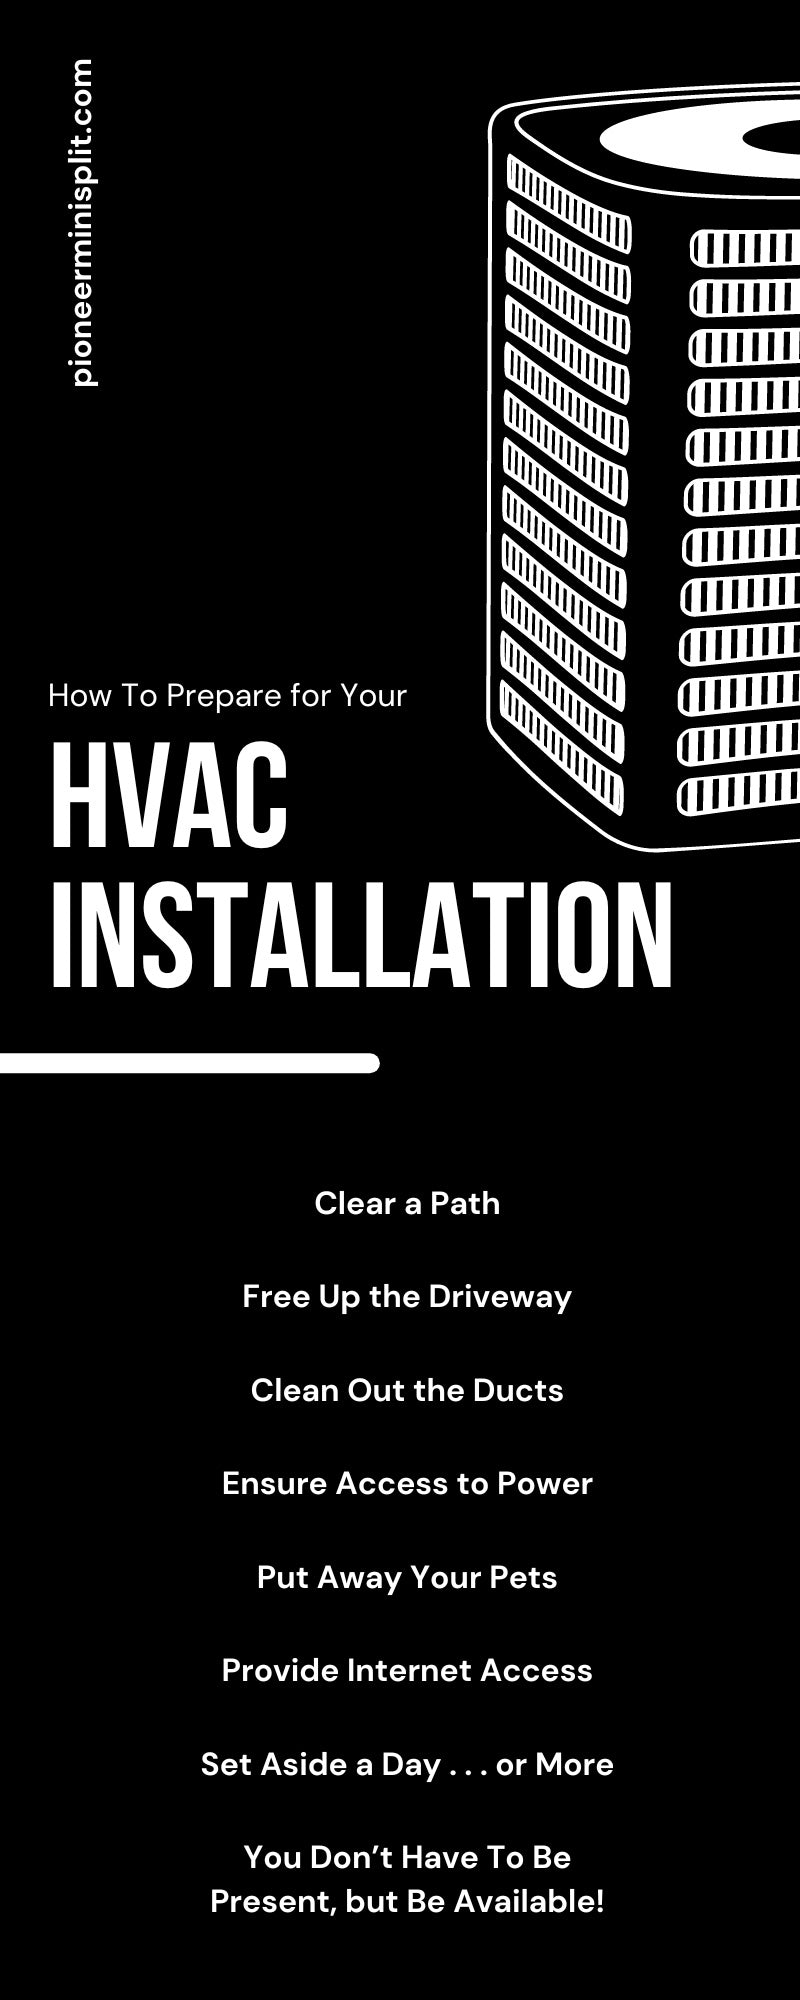 How To Prepare for Your HVAC Installation